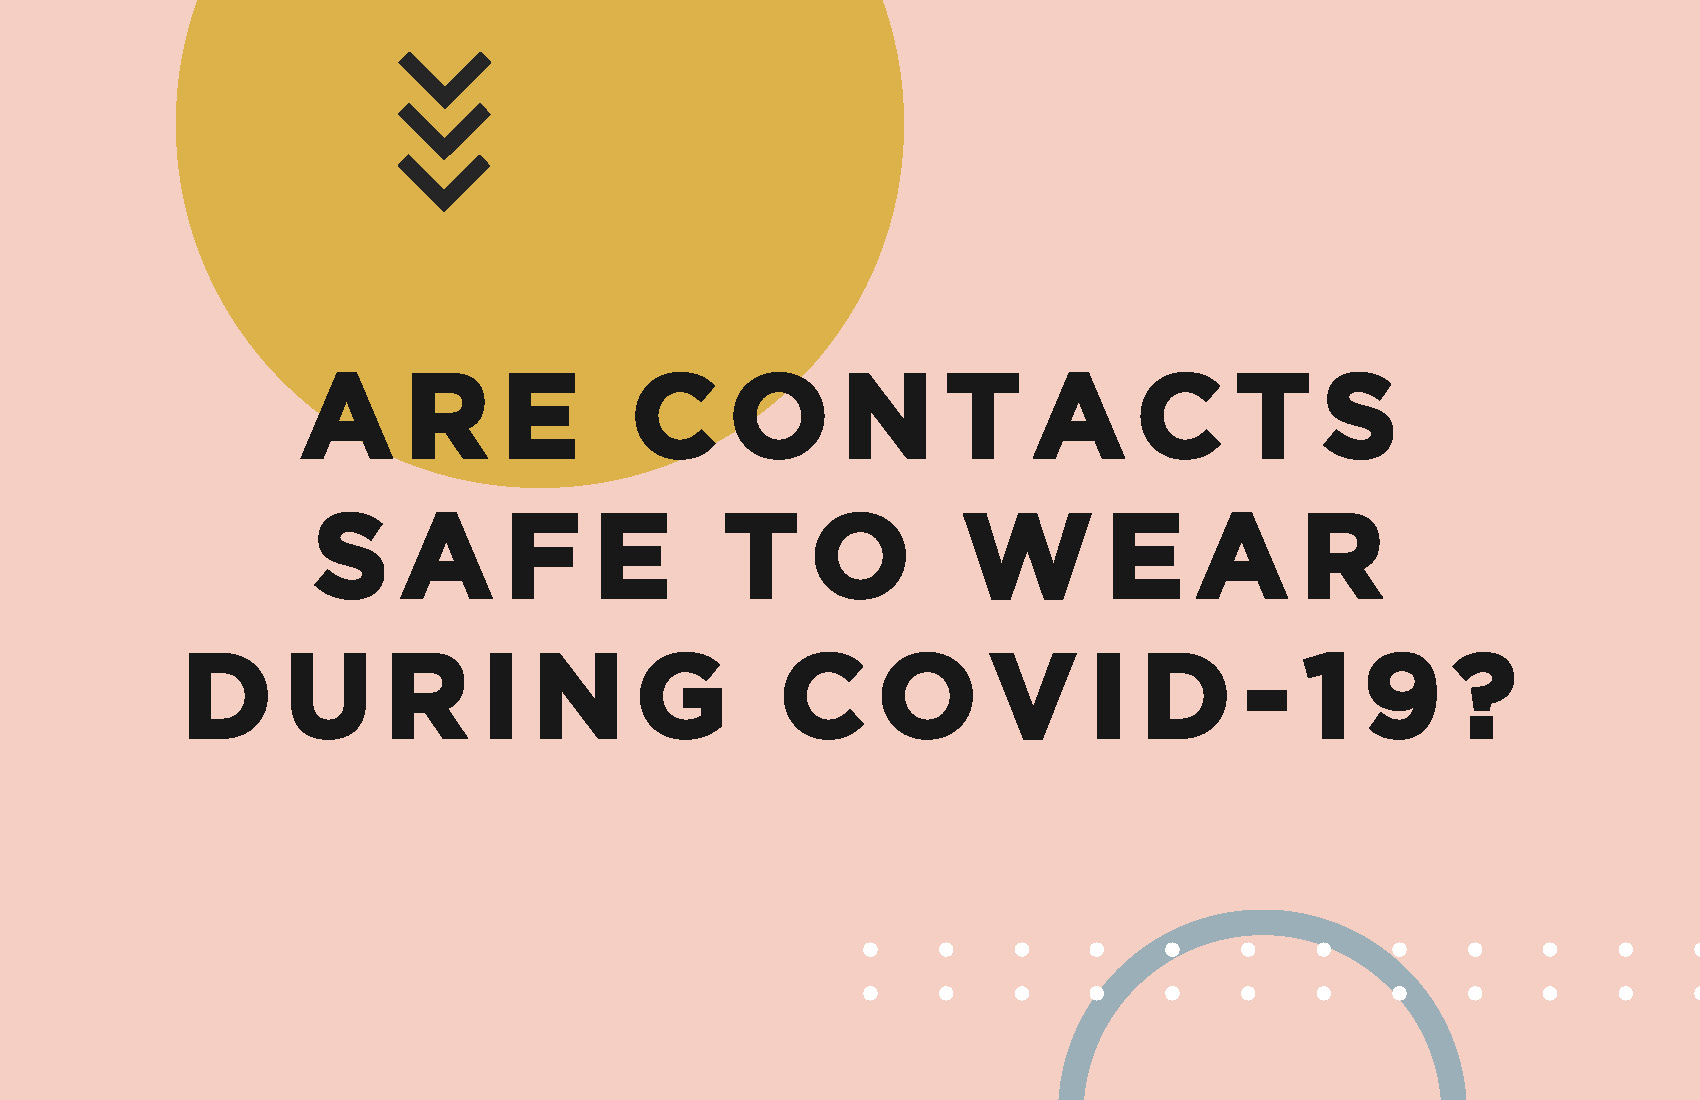 CONTACT LENS WEAR DURING COVID-19